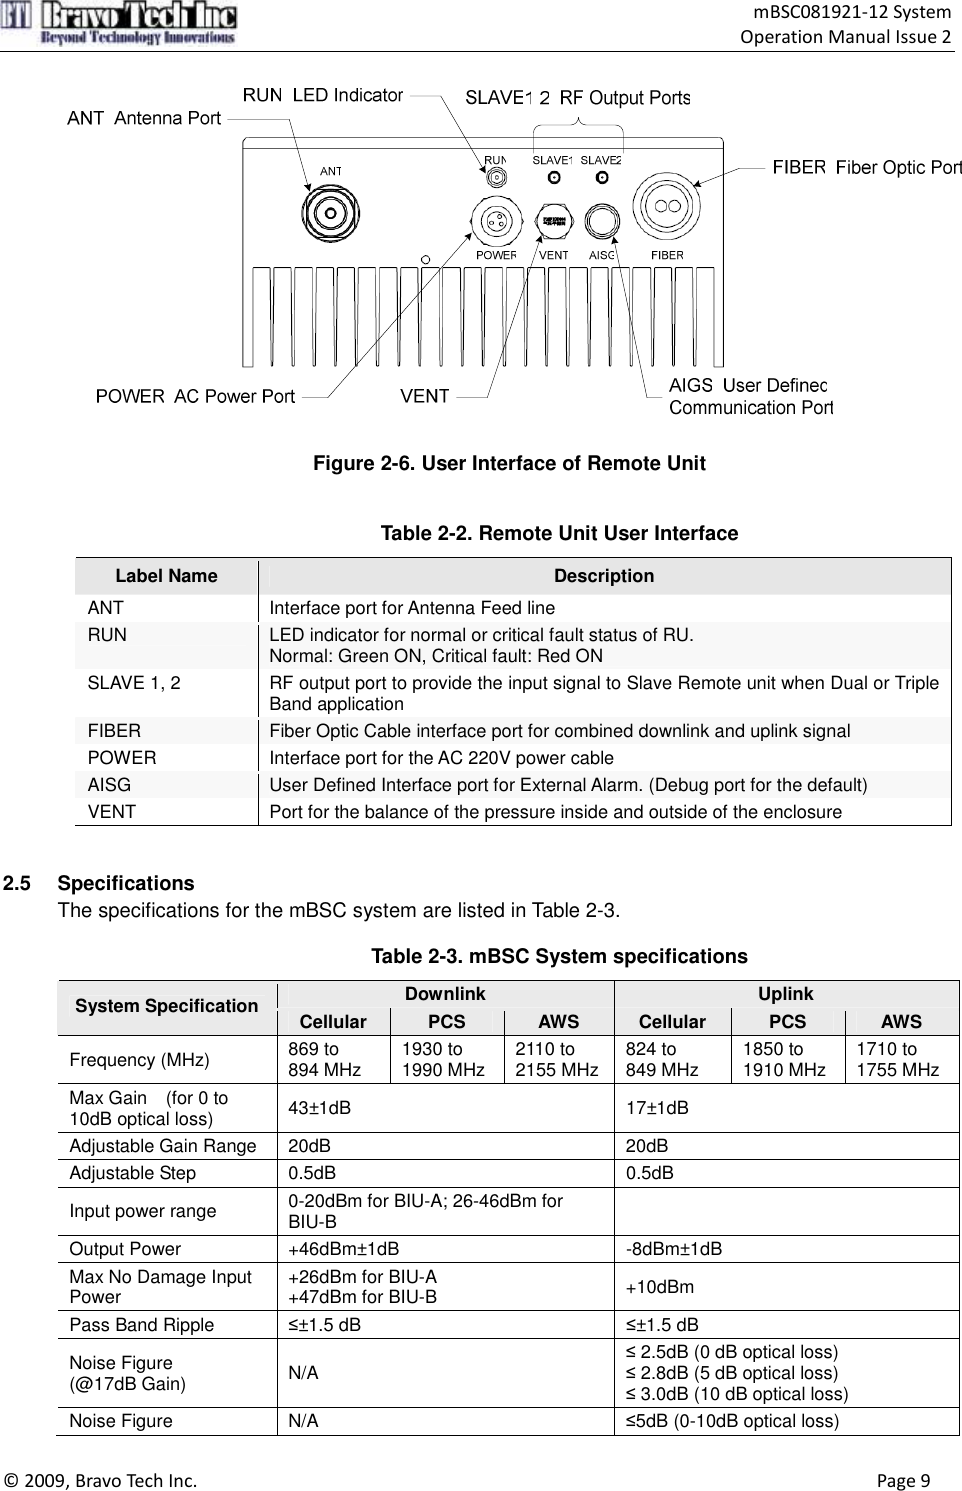                                    mBSC081921-12 System Operation Manual Issue 2  © 2009, Bravo Tech Inc.                                                                                                                                      Page 9   Figure 2-6. User Interface of Remote Unit   Table 2-2. Remote Unit User Interface Label Name  Description ANT  Interface port for Antenna Feed line RUN  LED indicator for normal or critical fault status of RU. Normal: Green ON, Critical fault: Red ON SLAVE 1, 2  RF output port to provide the input signal to Slave Remote unit when Dual or Triple Band application FIBER  Fiber Optic Cable interface port for combined downlink and uplink signal POWER  Interface port for the AC 220V power cable AISG  User Defined Interface port for External Alarm. (Debug port for the default) VENT  Port for the balance of the pressure inside and outside of the enclosure   2.5  Specifications The specifications for the mBSC system are listed in Table 2-3.  Table 2-3. mBSC System specifications Downlink  Uplink System Specification Cellular  PCS  AWS  Cellular  PCS  AWS Frequency (MHz)      869 to 894 MHz  1930 to 1990 MHz  2110 to 2155 MHz 824 to   849 MHz  1850 to 1910 MHz  1710 to 1755 MHz Max Gain    (for 0 to 10dB optical loss)      43±1dB  17±1dB Adjustable Gain Range  20dB  20dB Adjustable Step  0.5dB  0.5dB Input power range  0-20dBm for BIU-A; 26-46dBm for BIU-B   Output Power  +46dBm±1dB  -8dBm±1dB Max No Damage Input Power  +26dBm for BIU-A +47dBm for BIU-B  +10dBm Pass Band Ripple  ≤±1.5 dB  ≤±1.5 dB Noise Figure (@17dB Gain)      N/A  ≤ 2.5dB (0 dB optical loss)     ≤ 2.8dB (5 dB optical loss)     ≤ 3.0dB (10 dB optical loss)     Noise Figure  N/A  ≤5dB (0-10dB optical loss)     